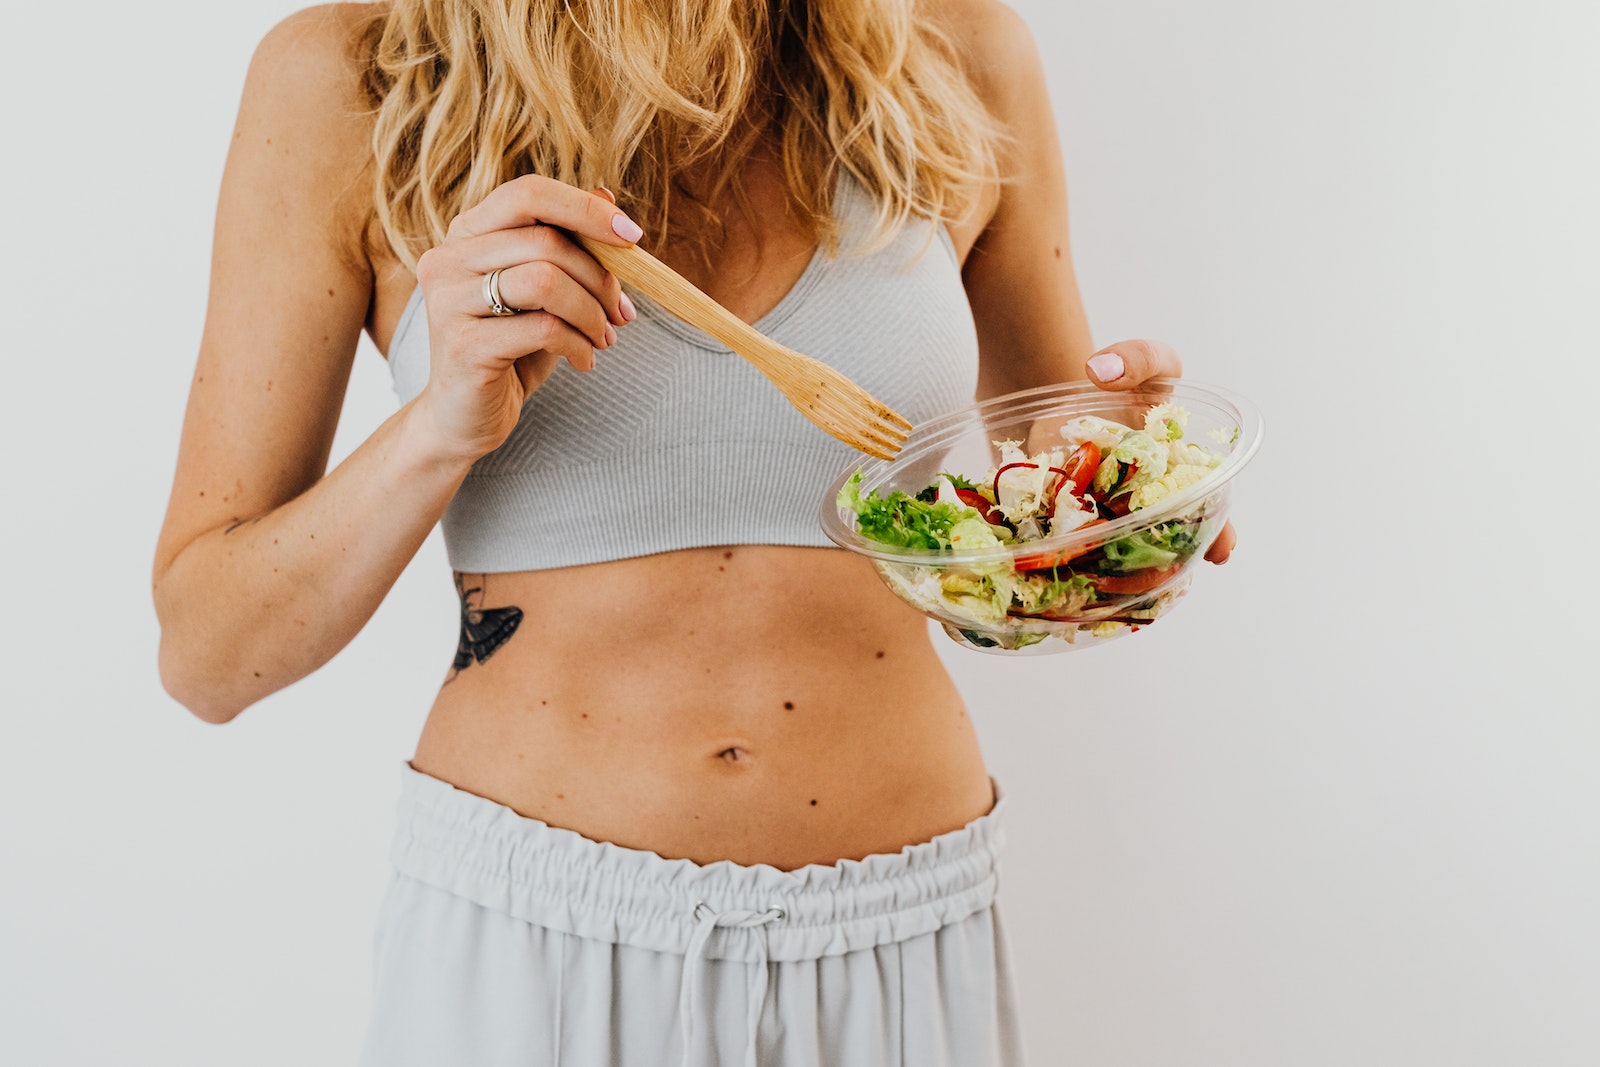 The Relationship between Intuitive Eating and Body Image body perception